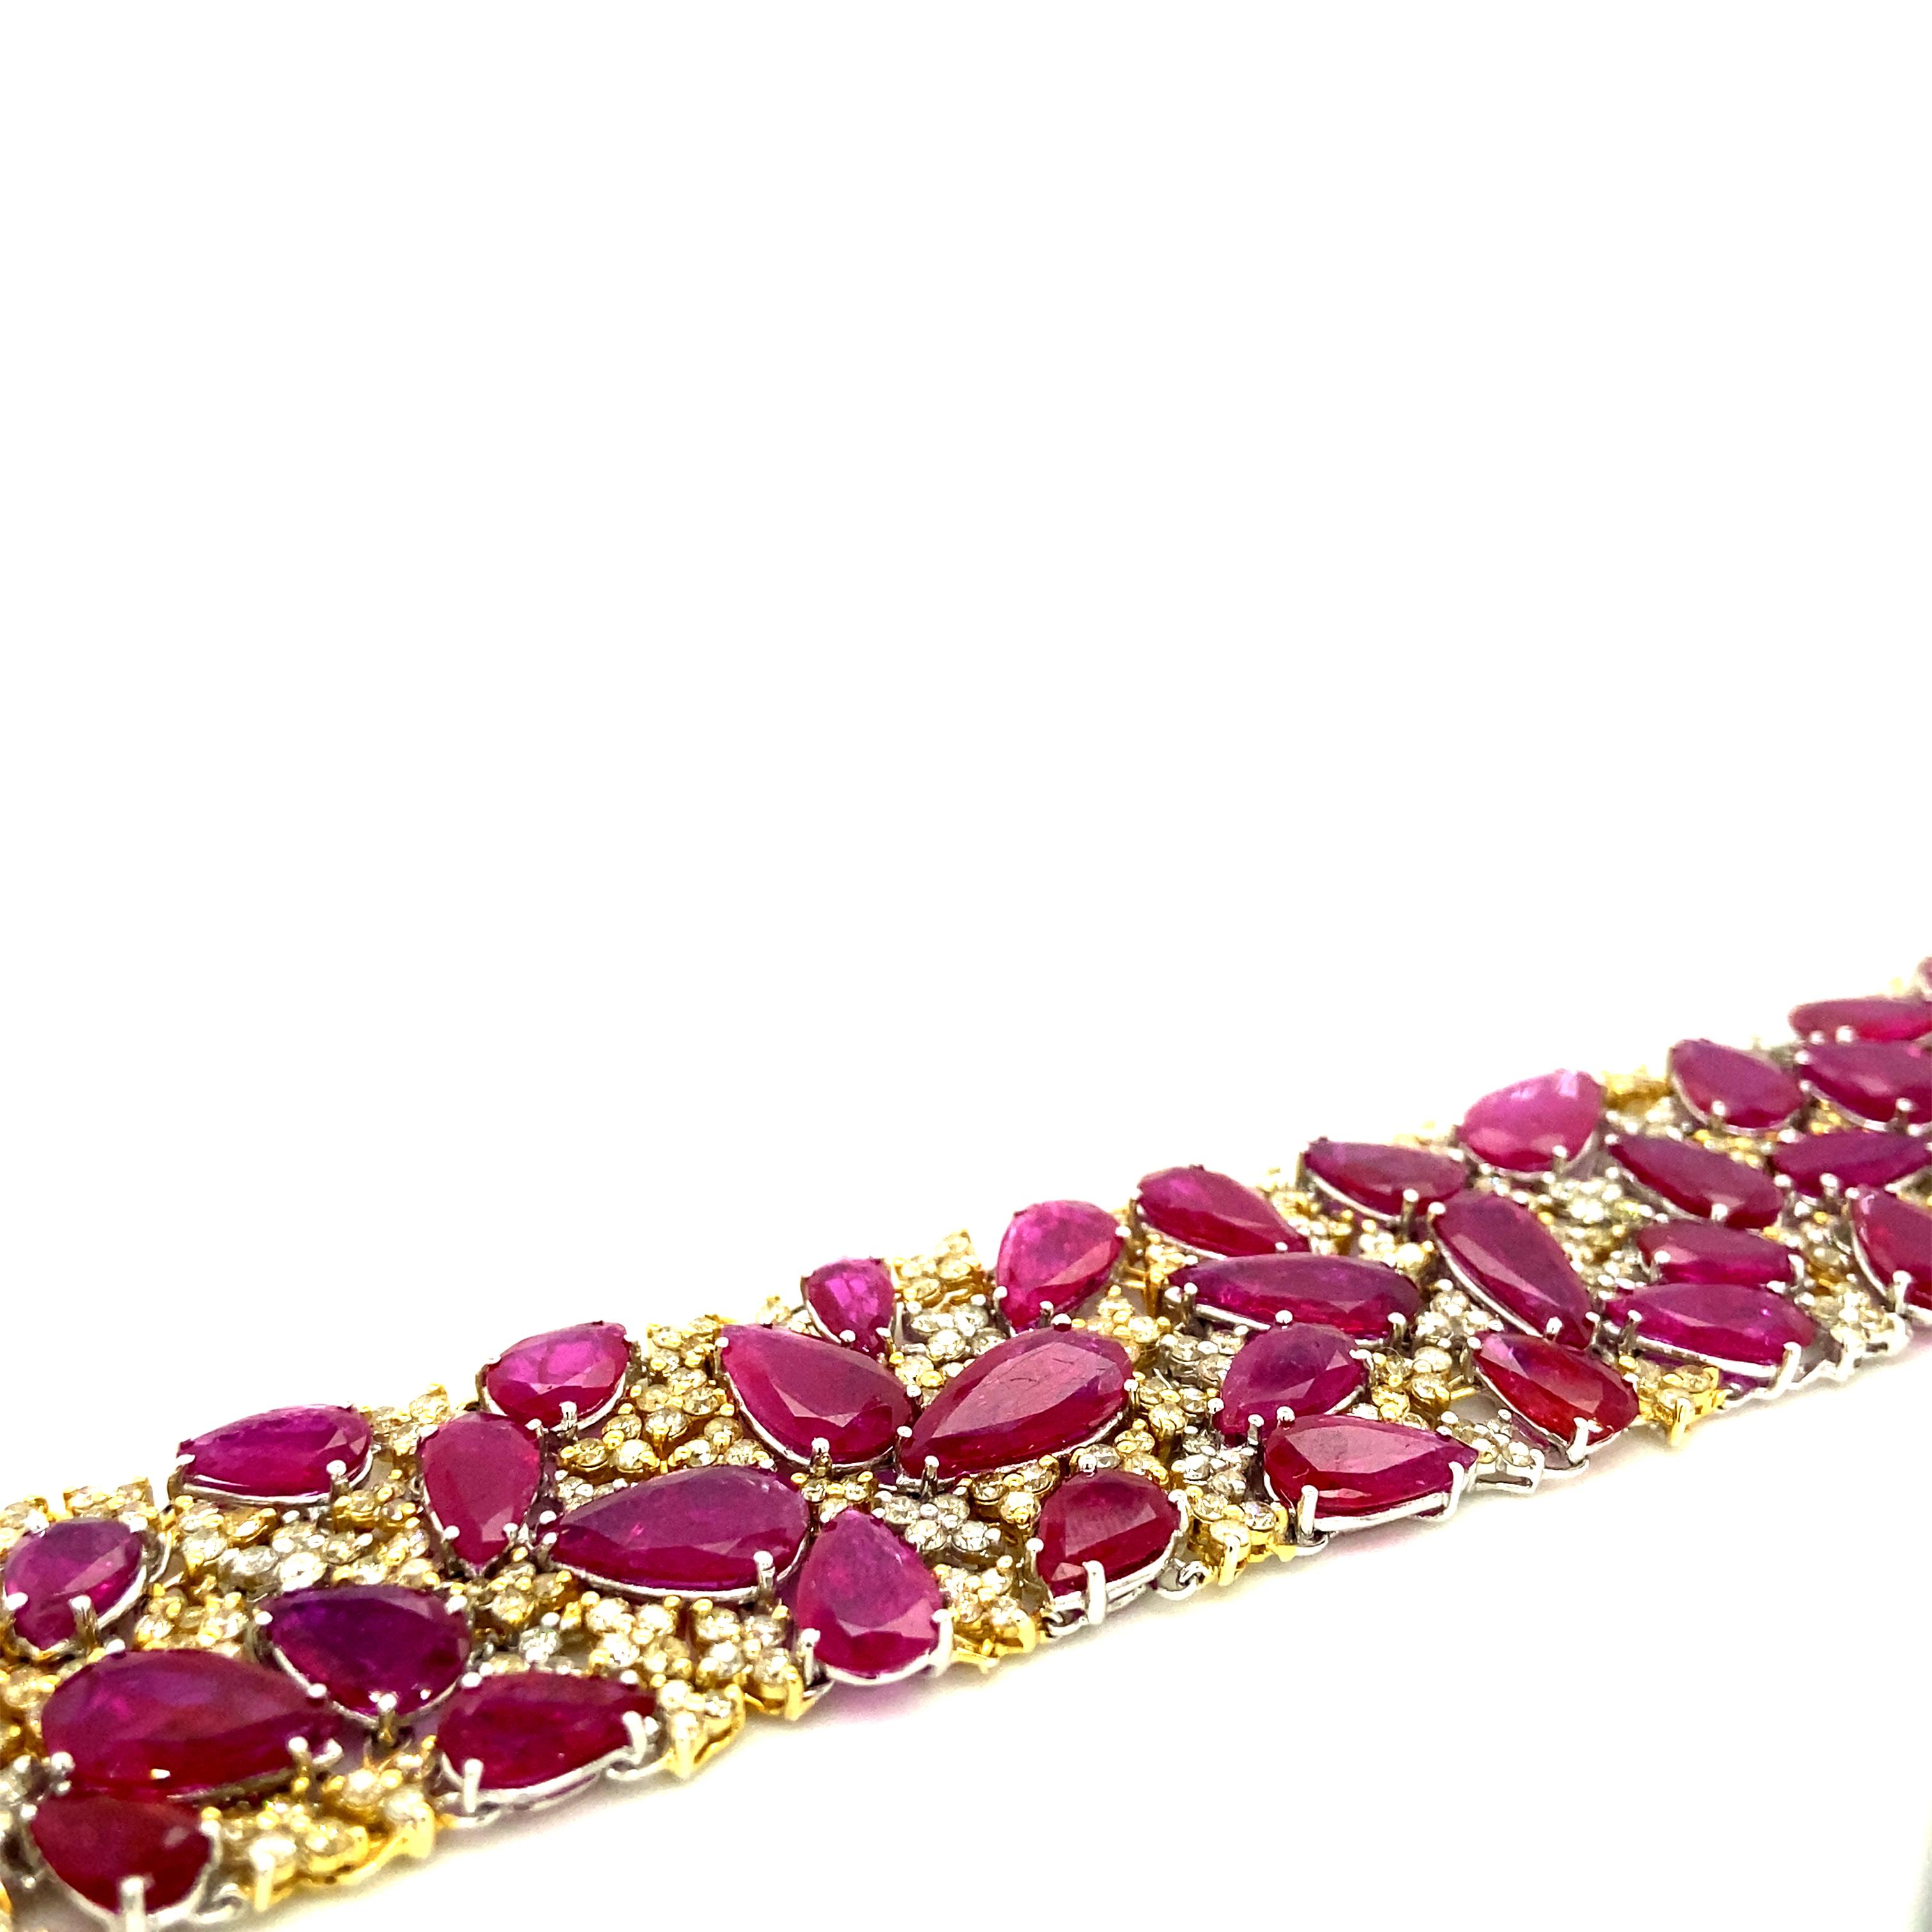 58.24 Carat Pear-Shaped Ruby and Yellow Diamond Gold Bracelet 1